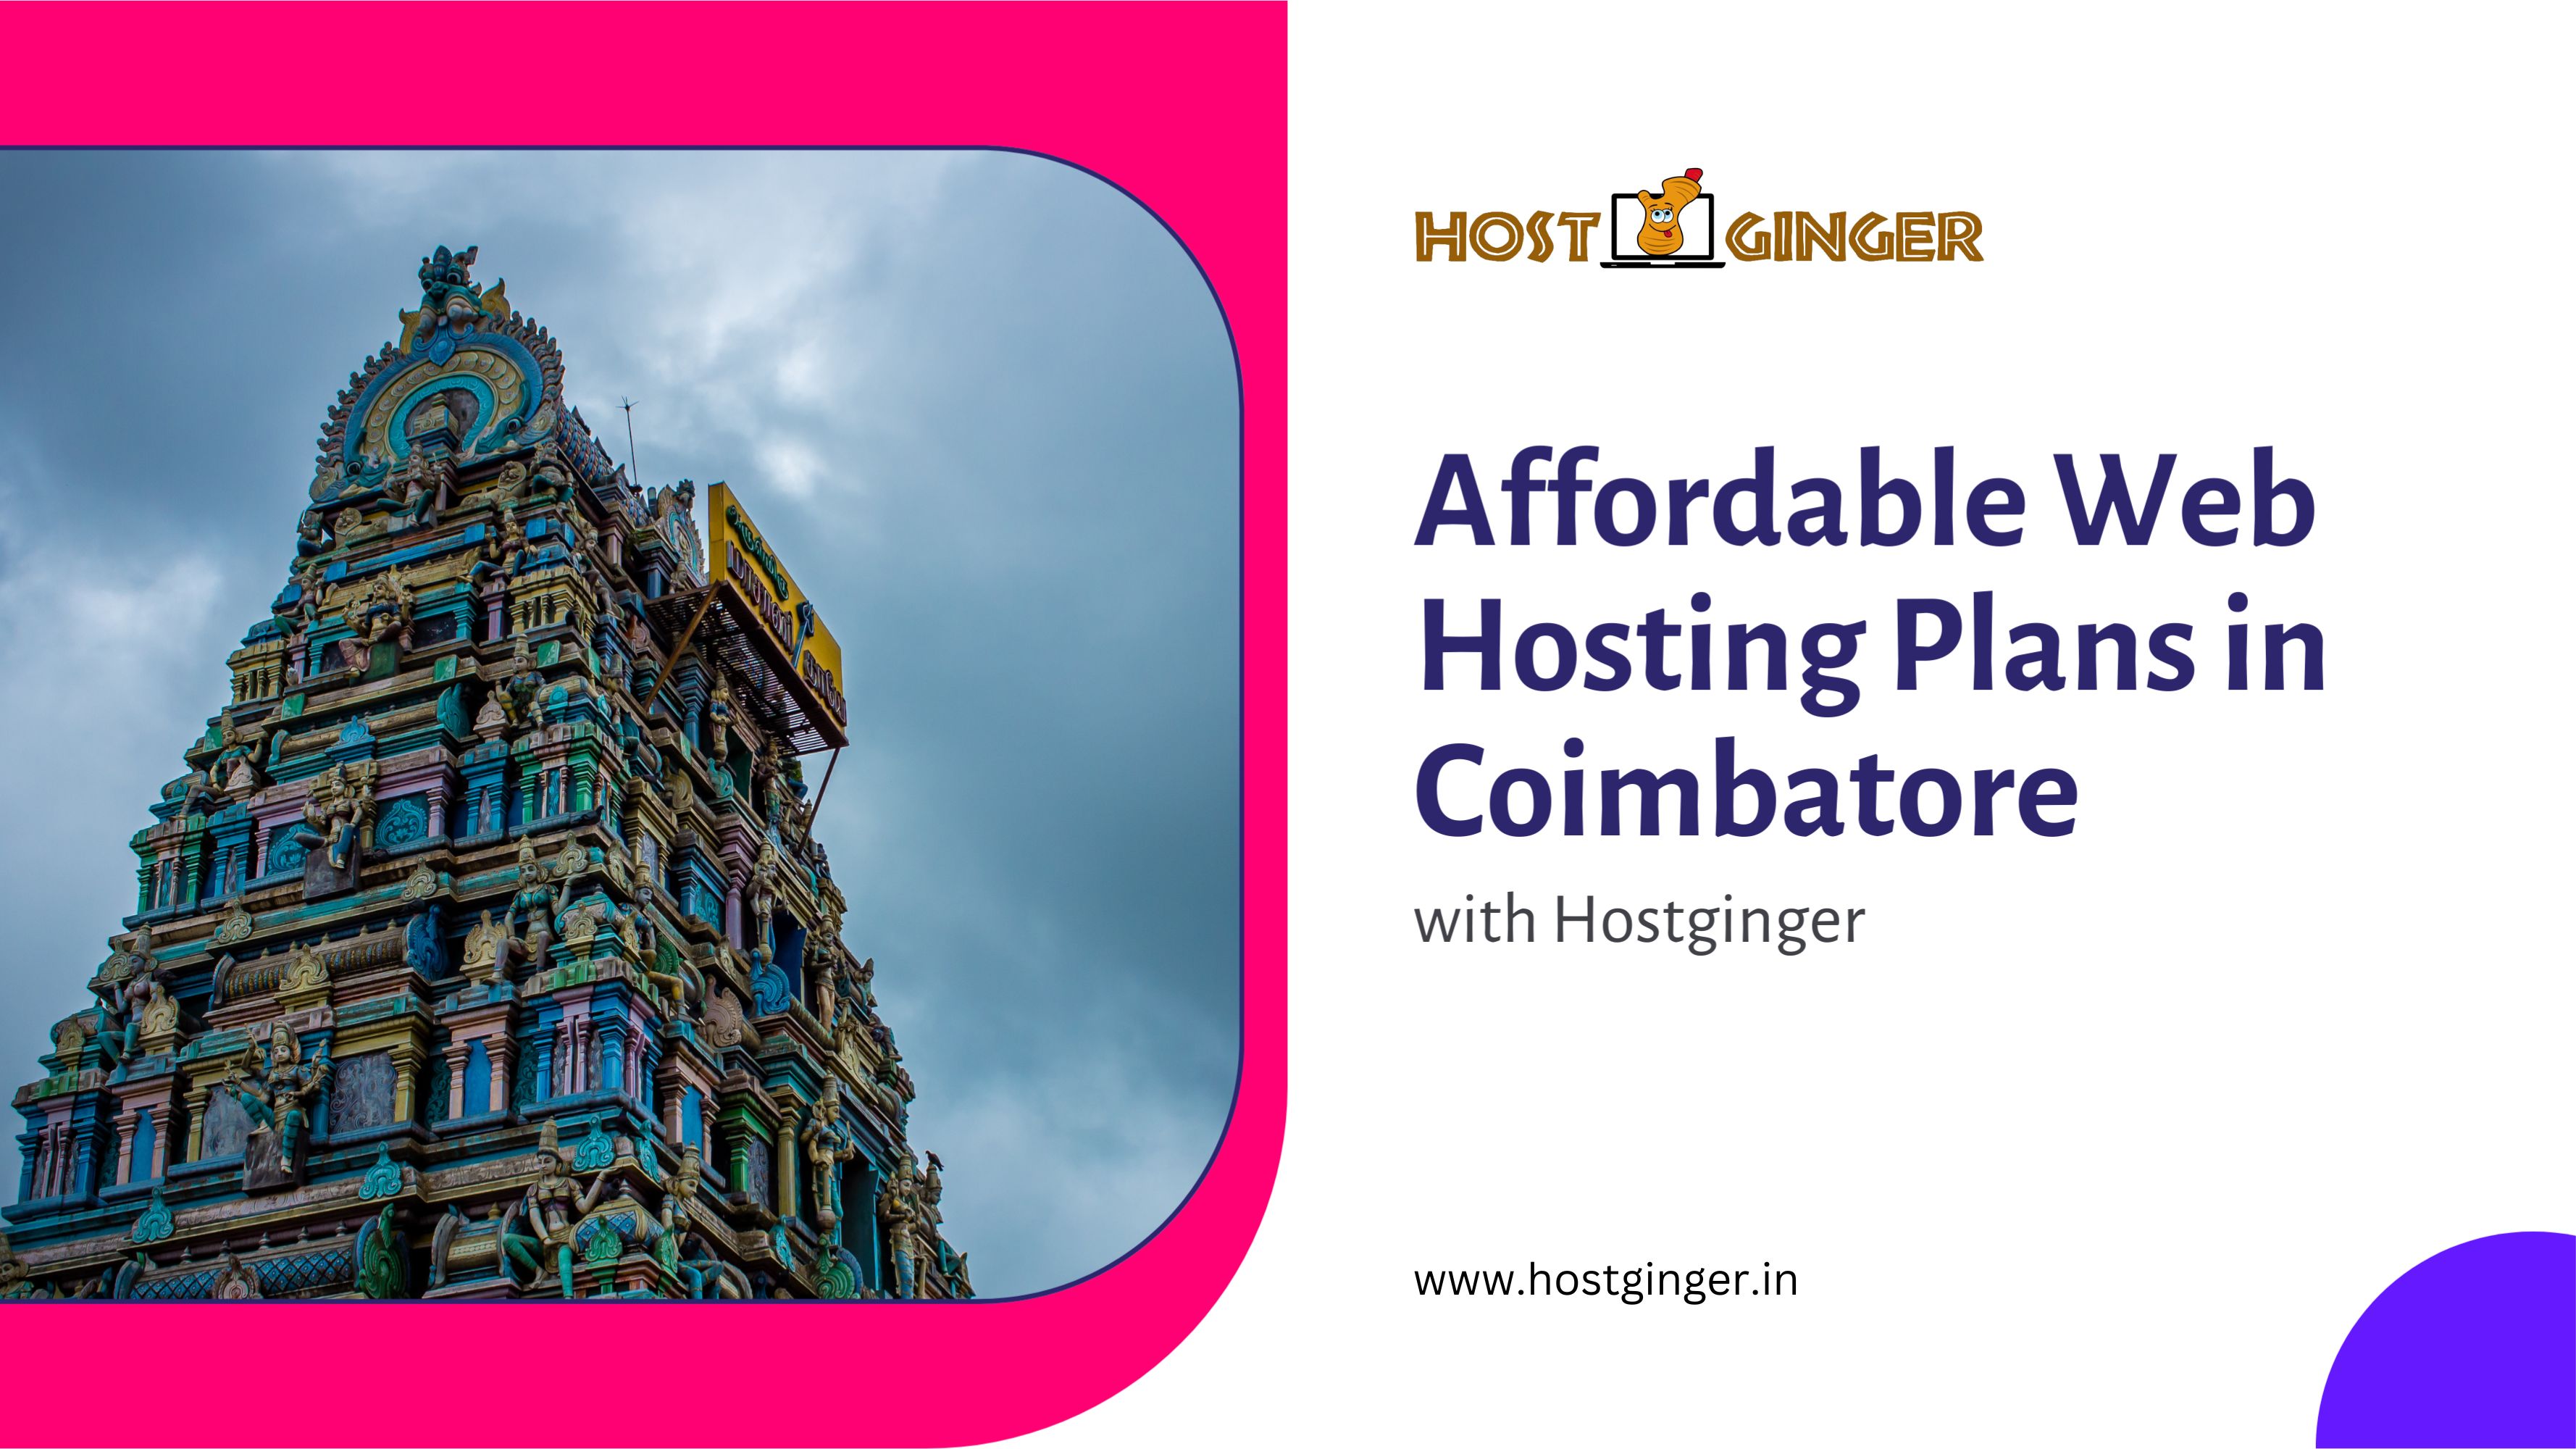 Affordable Web Hosting Plans in Coimbatore